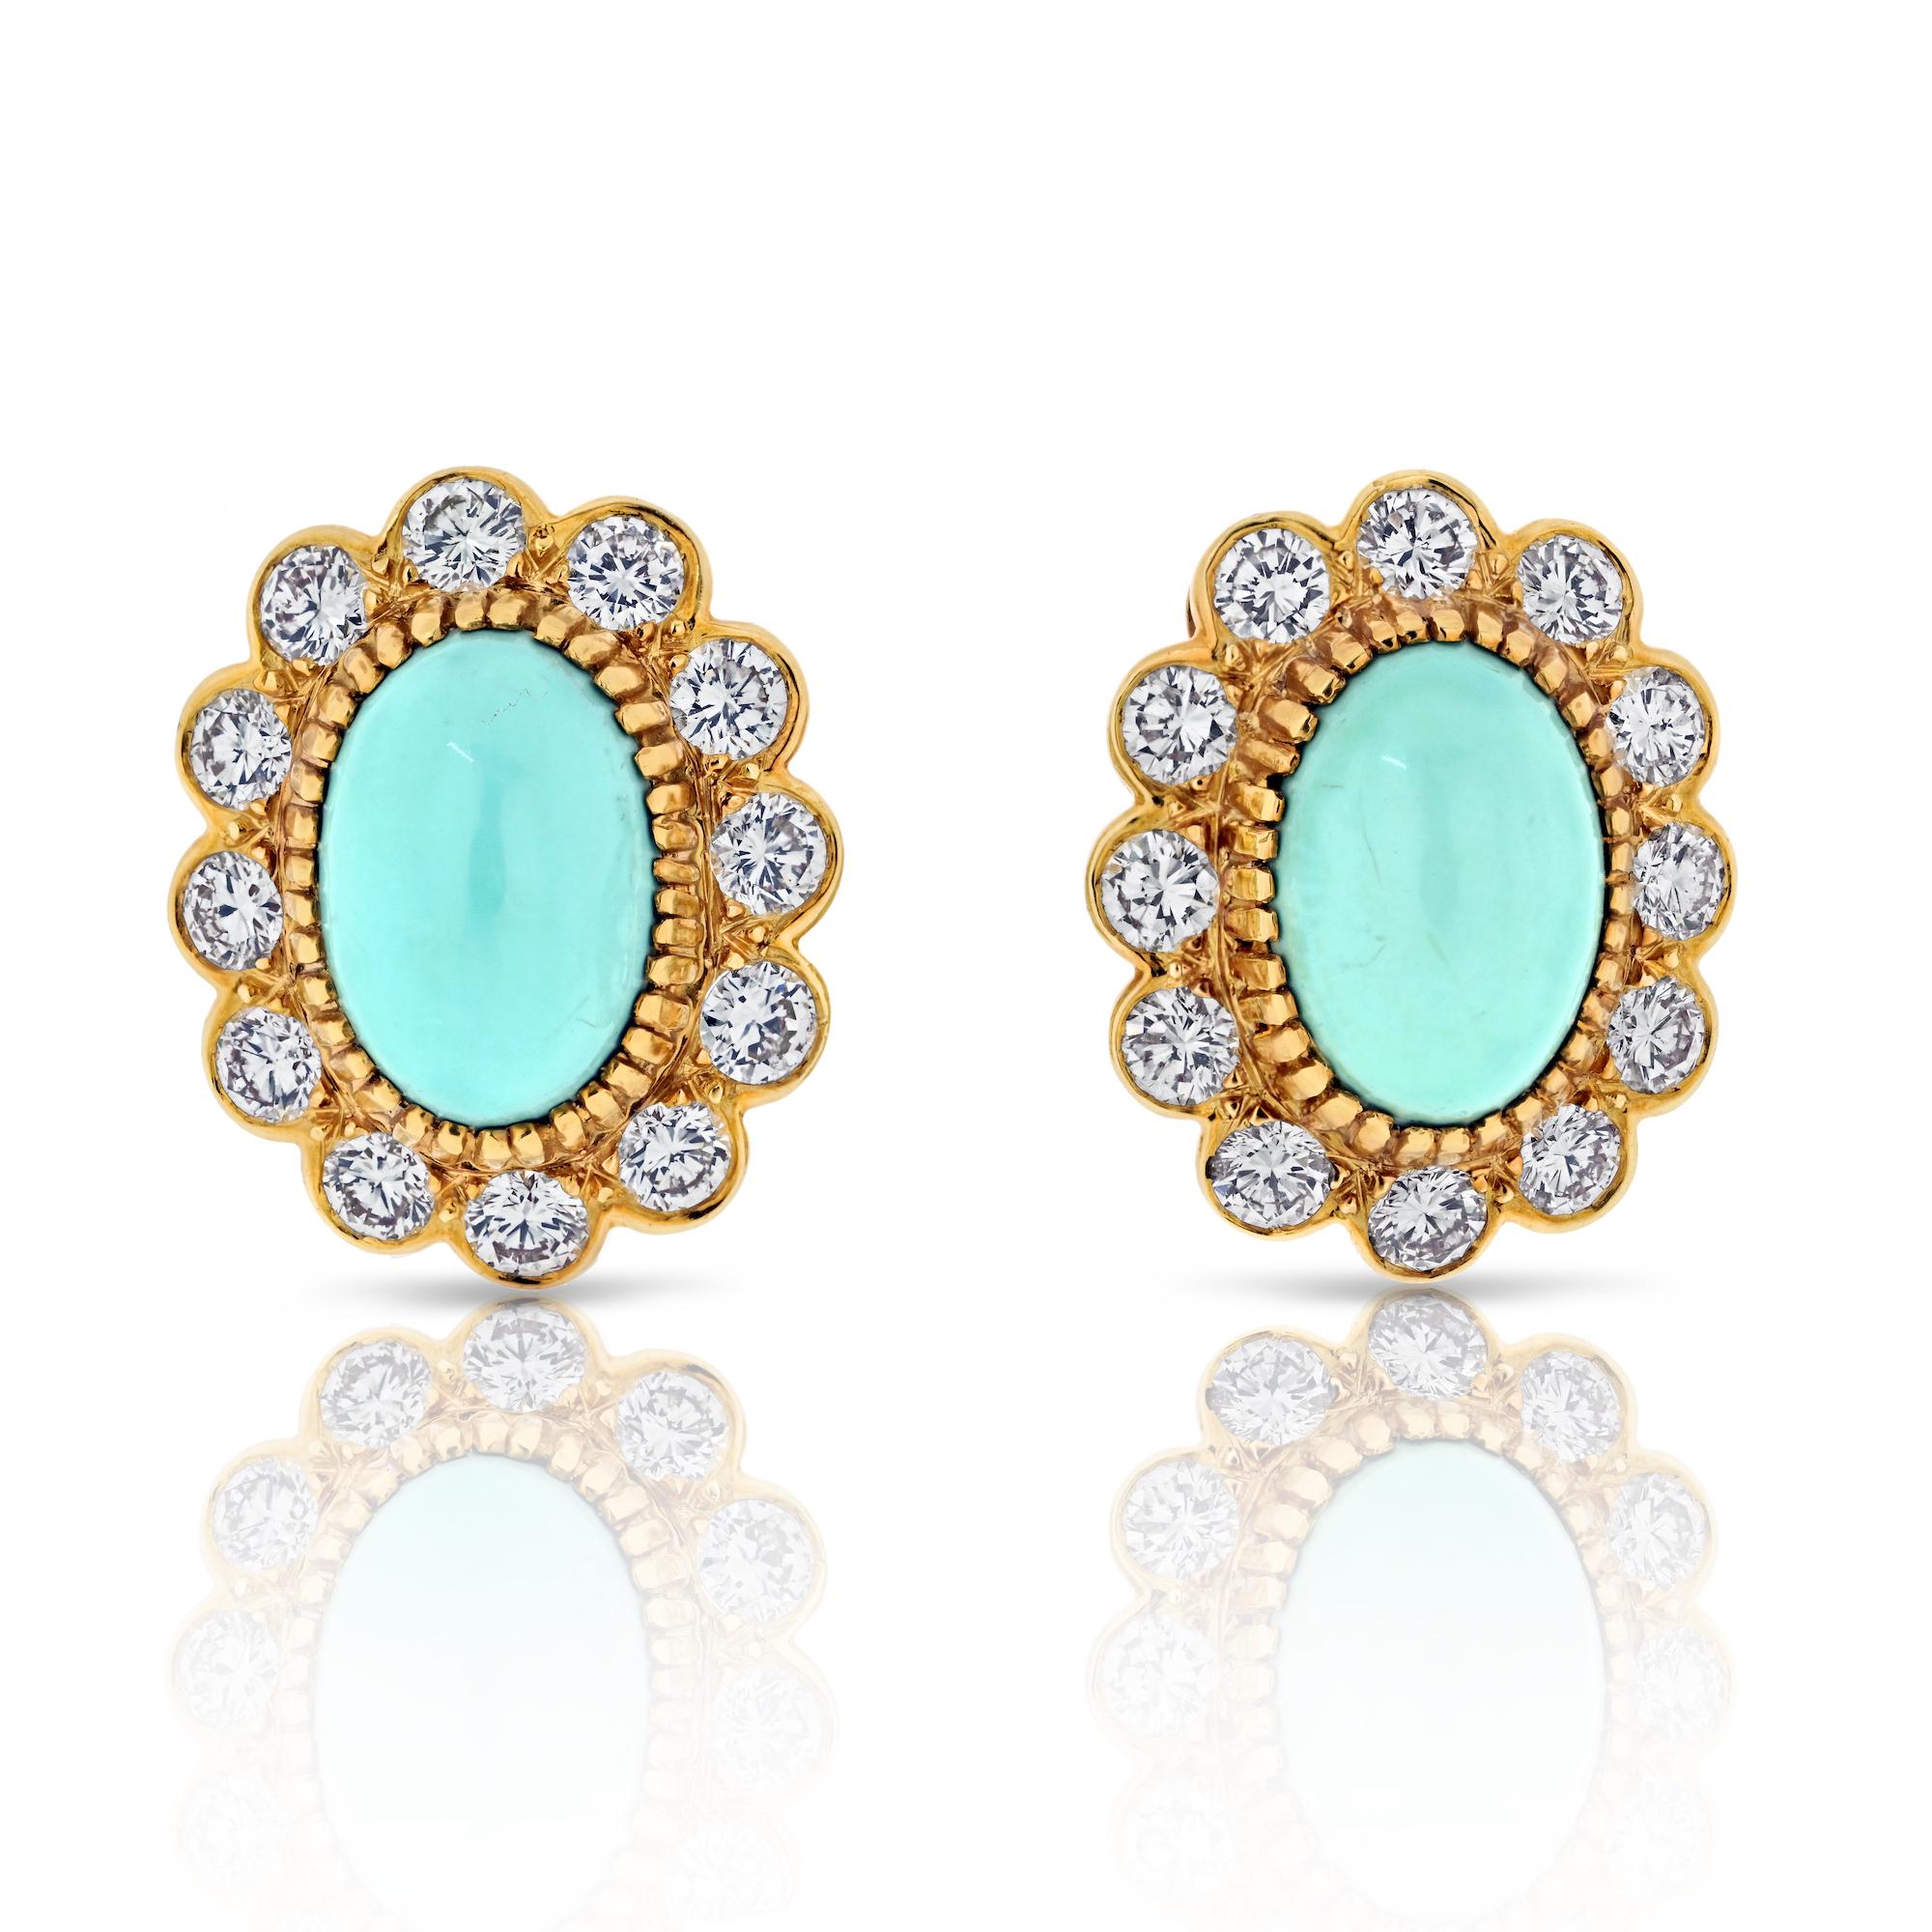 Van Cleef & Arpels turquoise and diamond floral ear-clips in 18k yellow gold. The earrings are designed as flower, with the centers set with cabochon cut oval shape turquoises measuring
approximately 14mm by 9.5mm. Surrounded by total of 24 of round